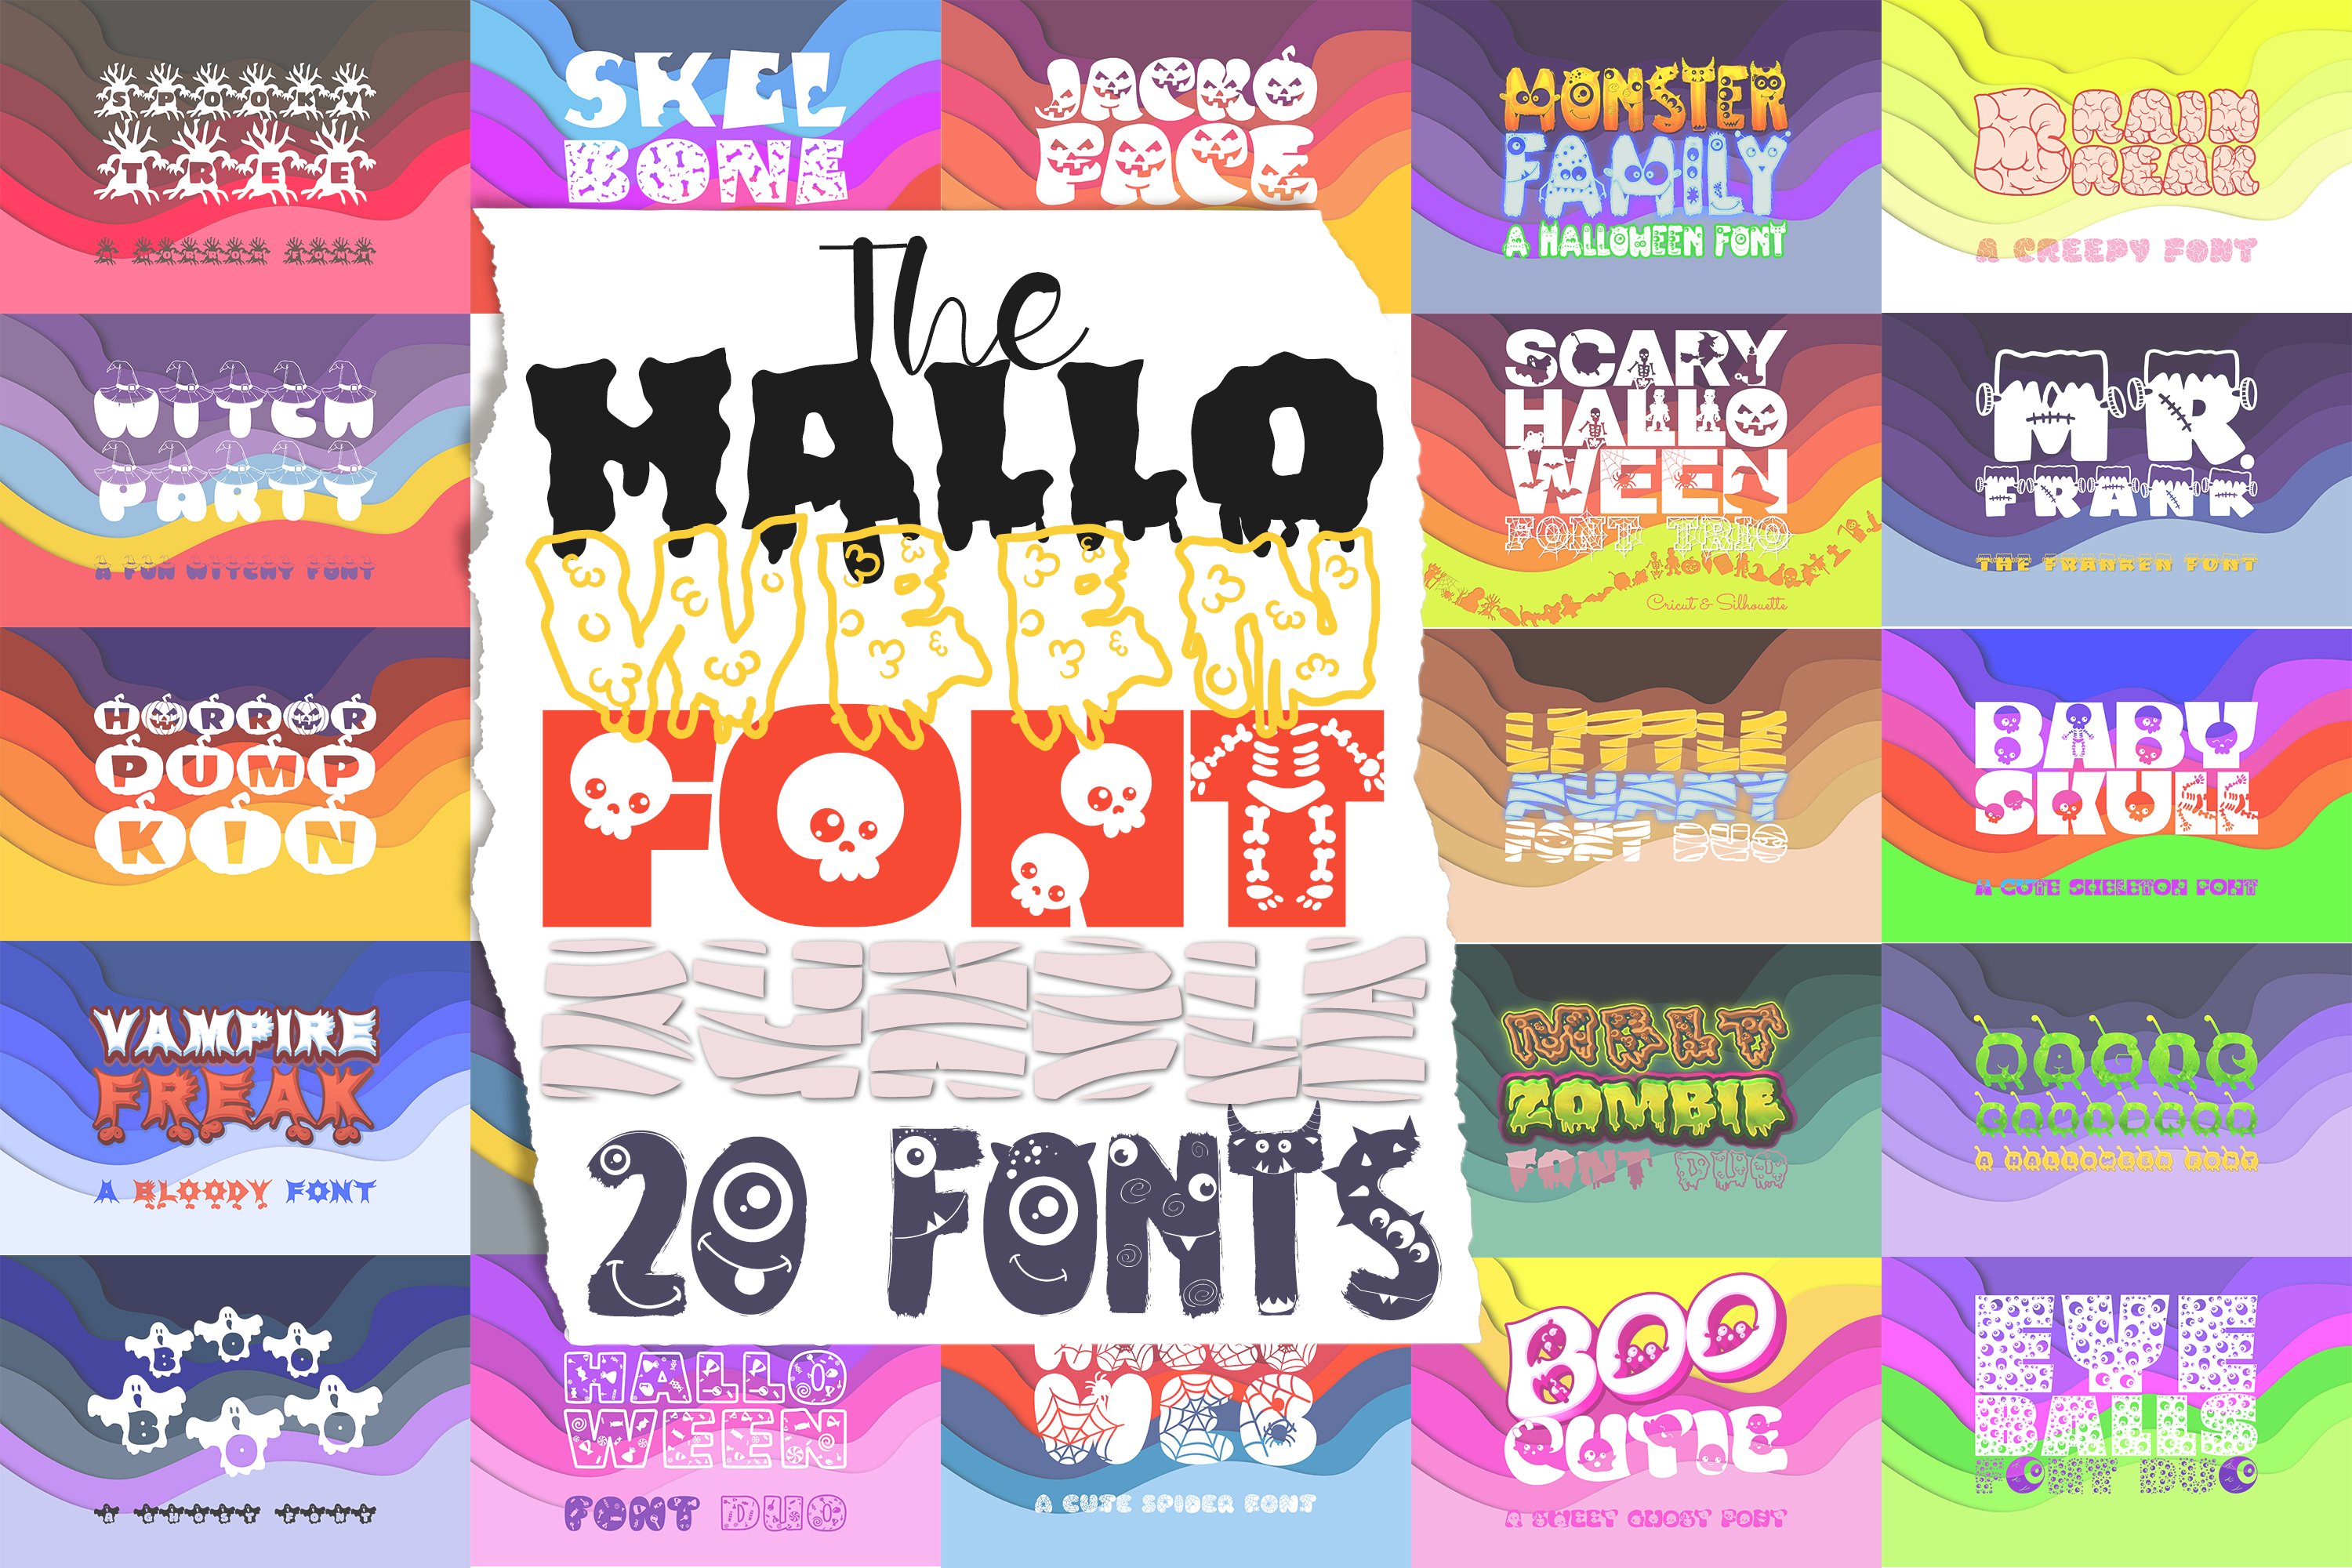 The Halloween Font Bundle cover image.